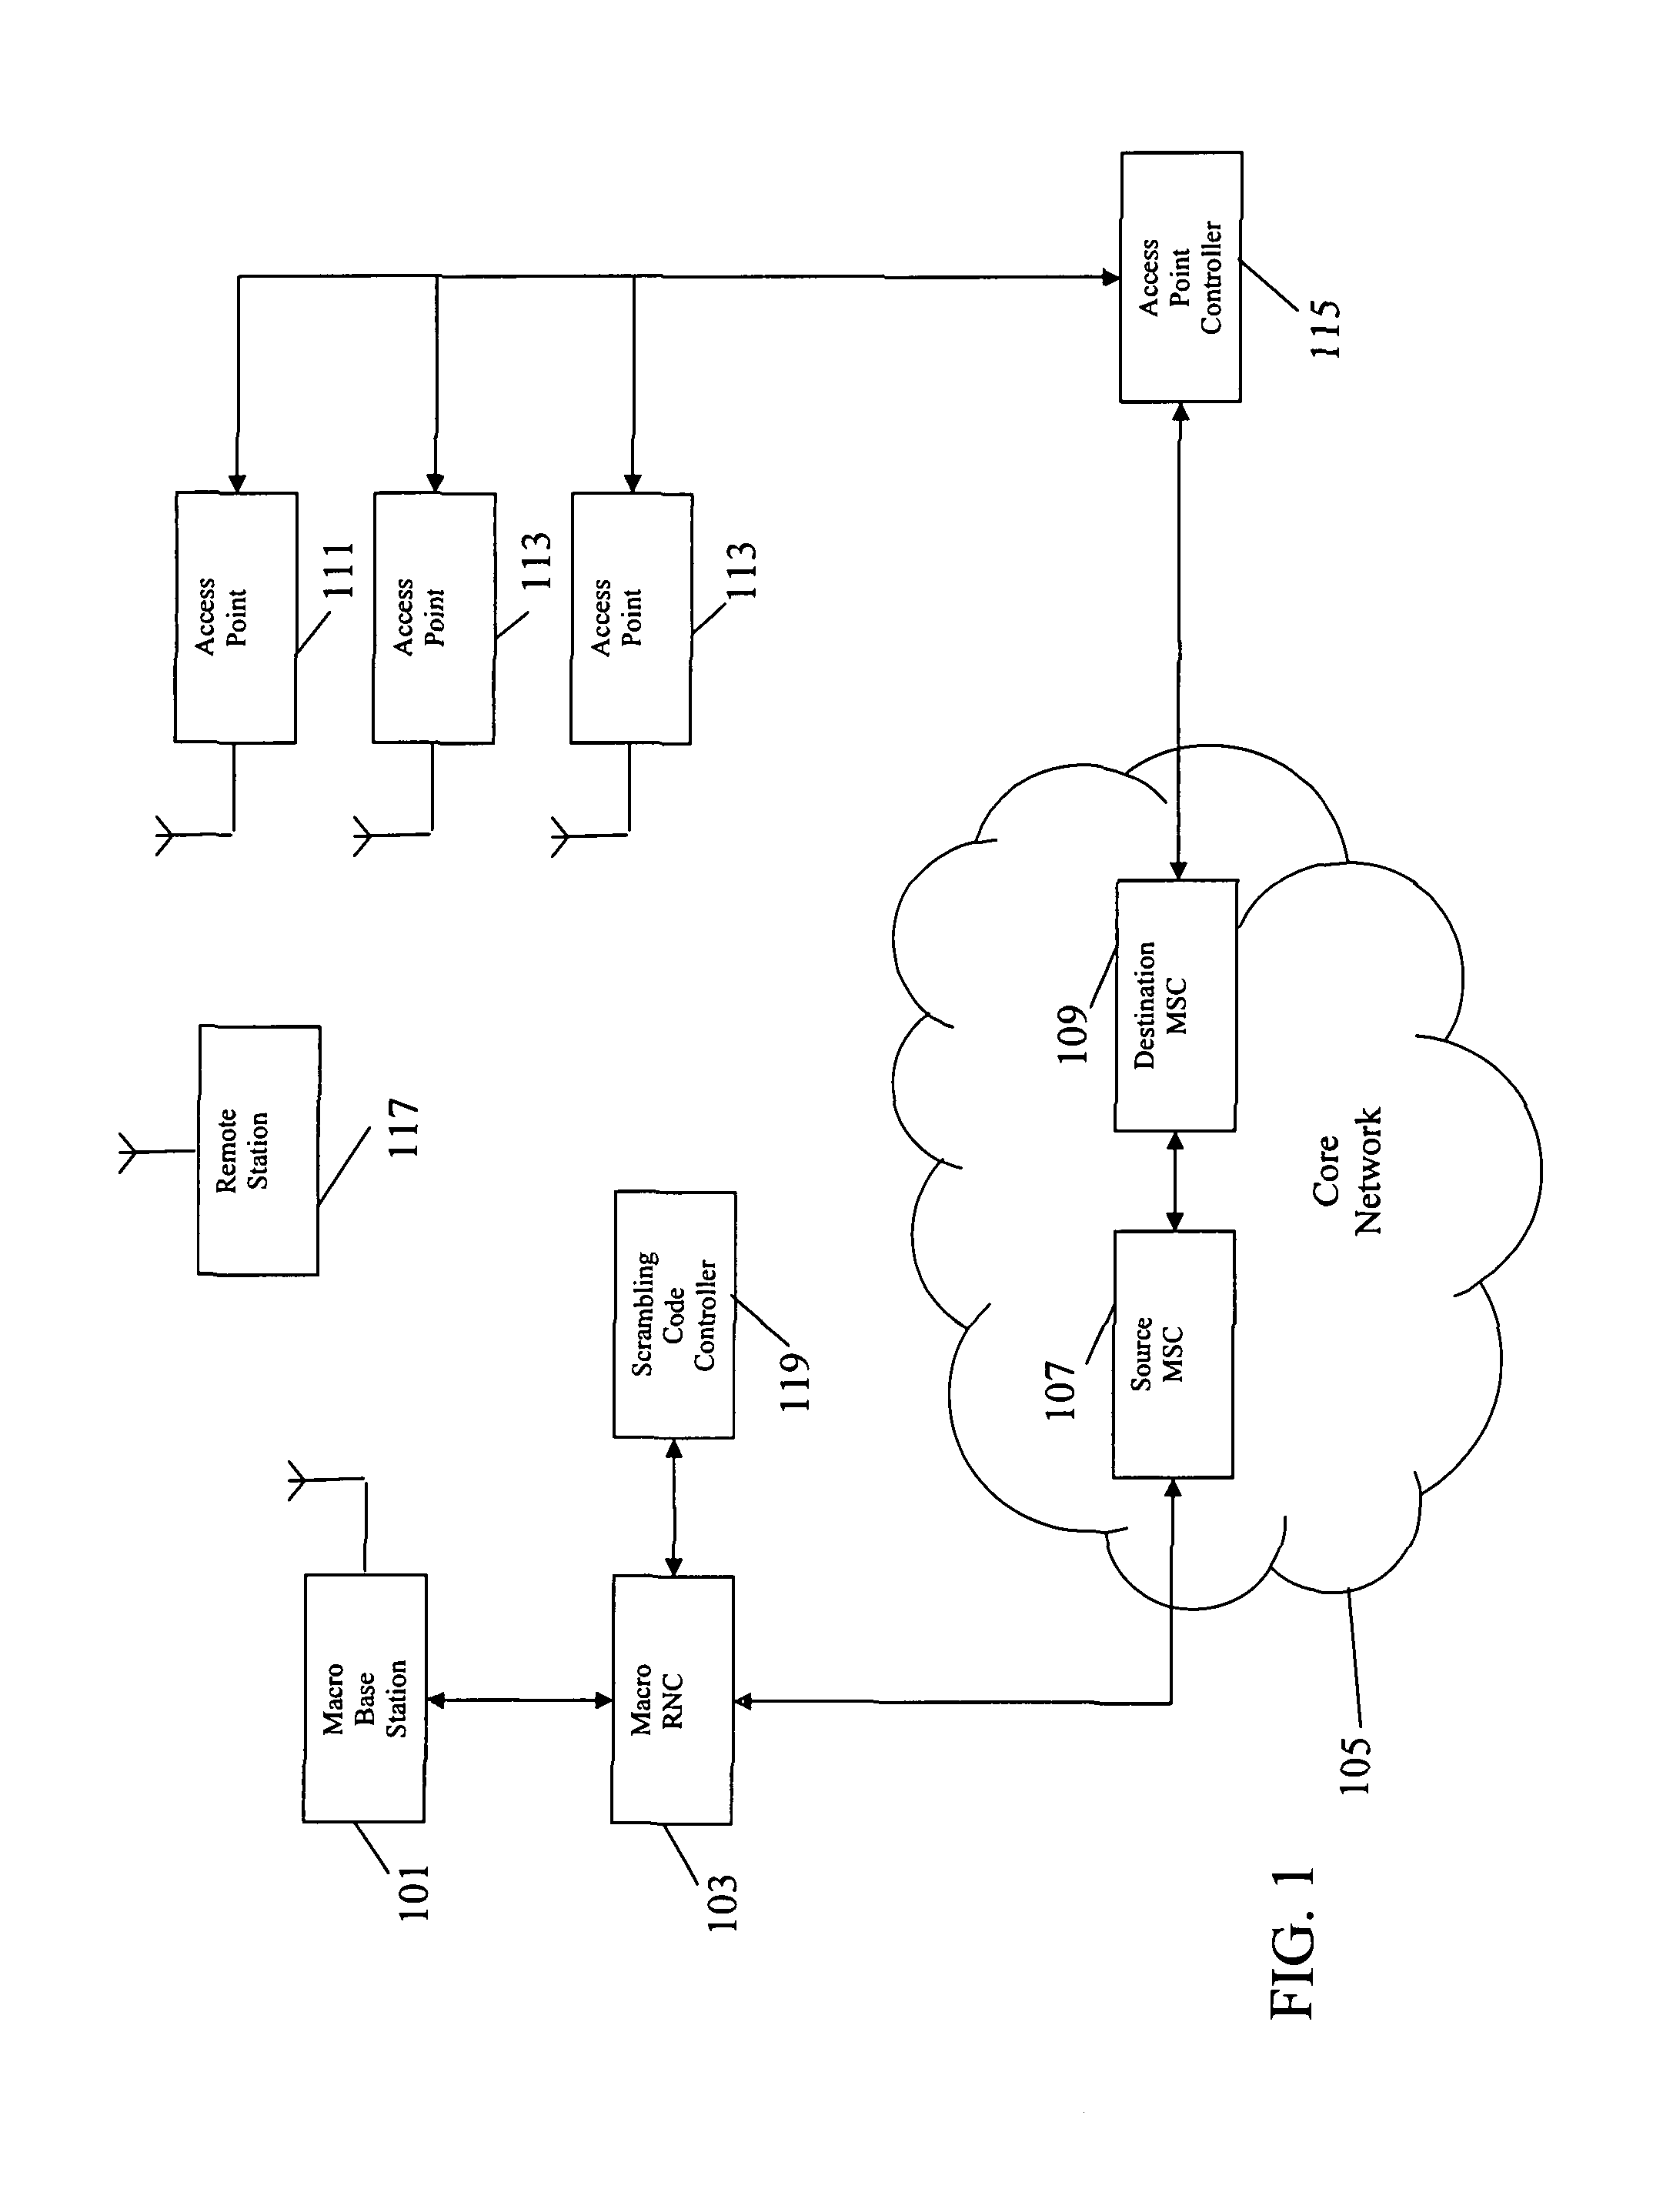 Code division multiple access cellular communication system